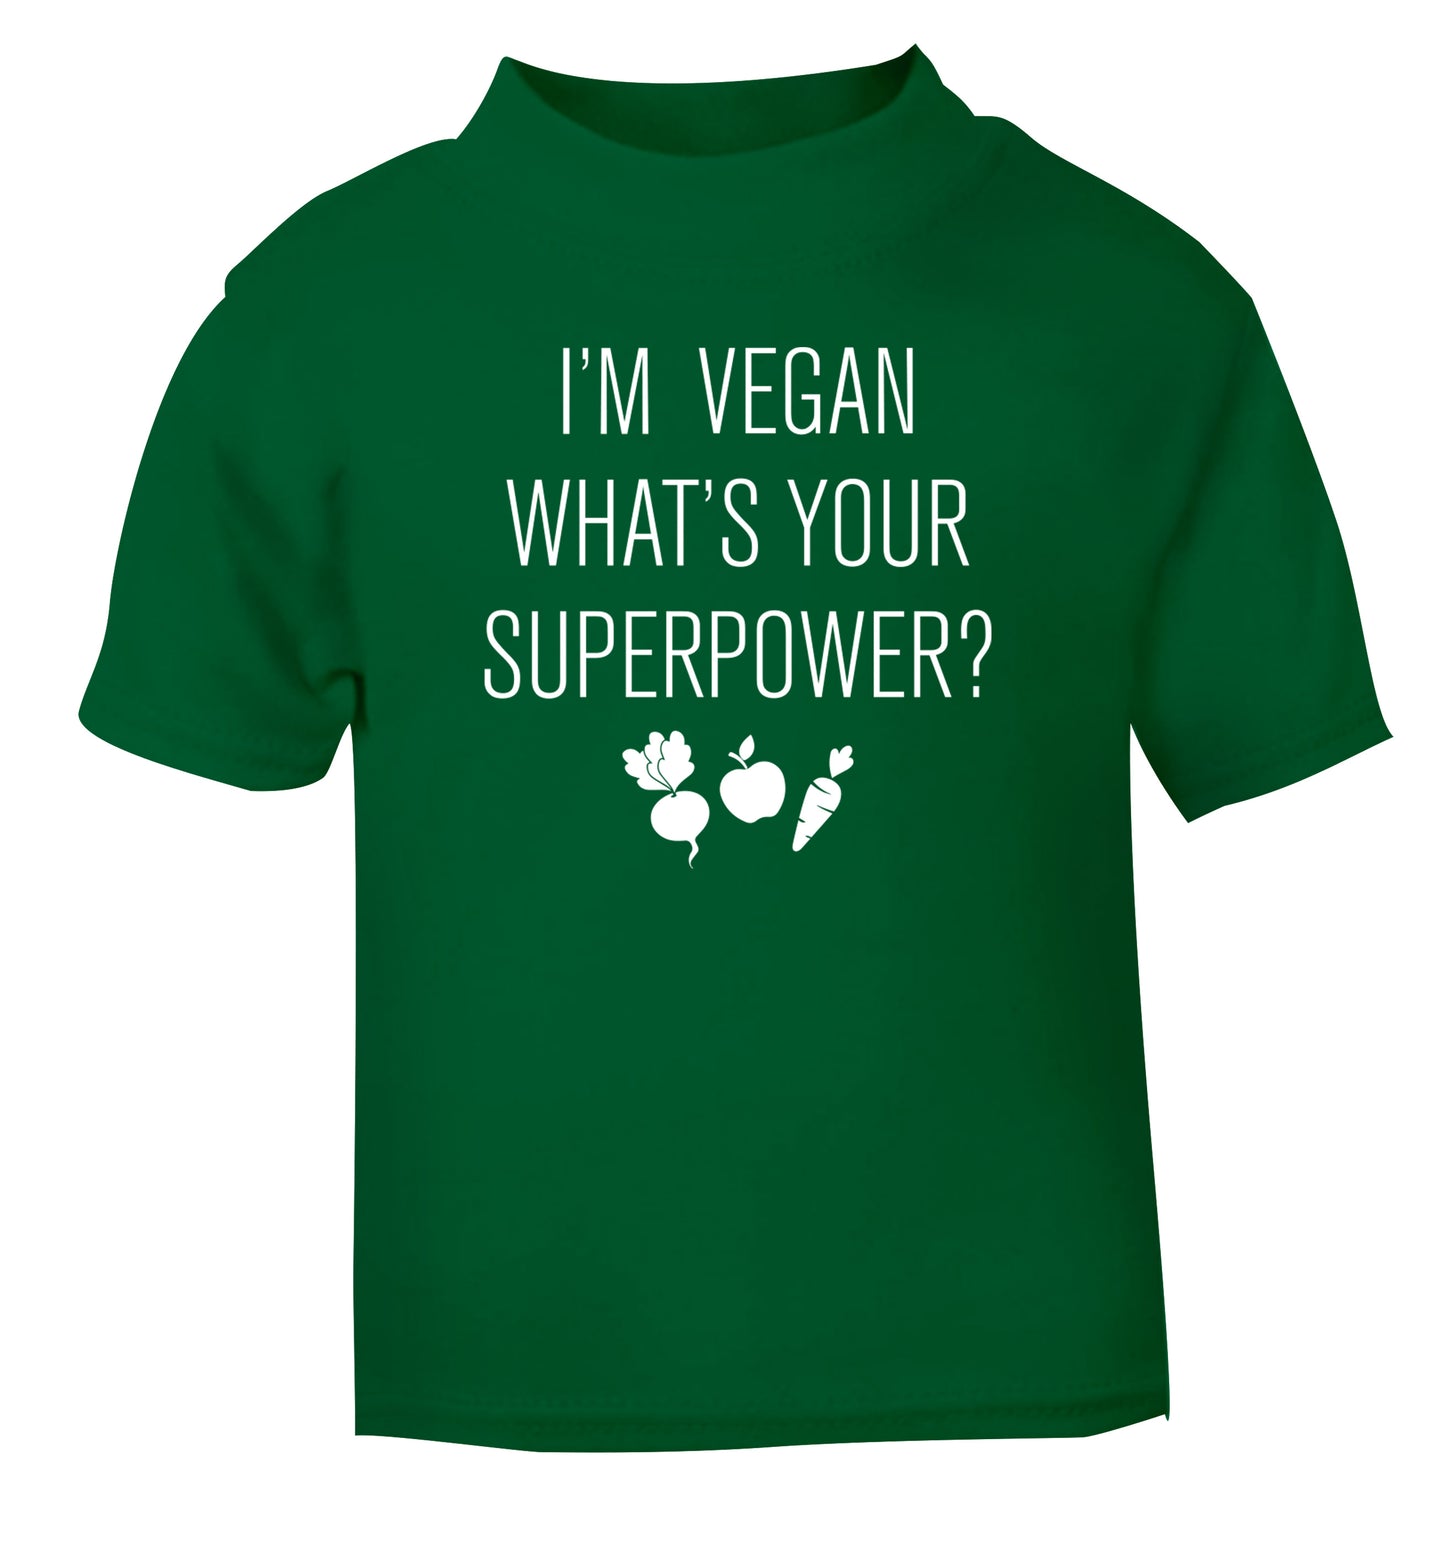 I'm Vegan What's Your Superpower? green Baby Toddler Tshirt 2 Years